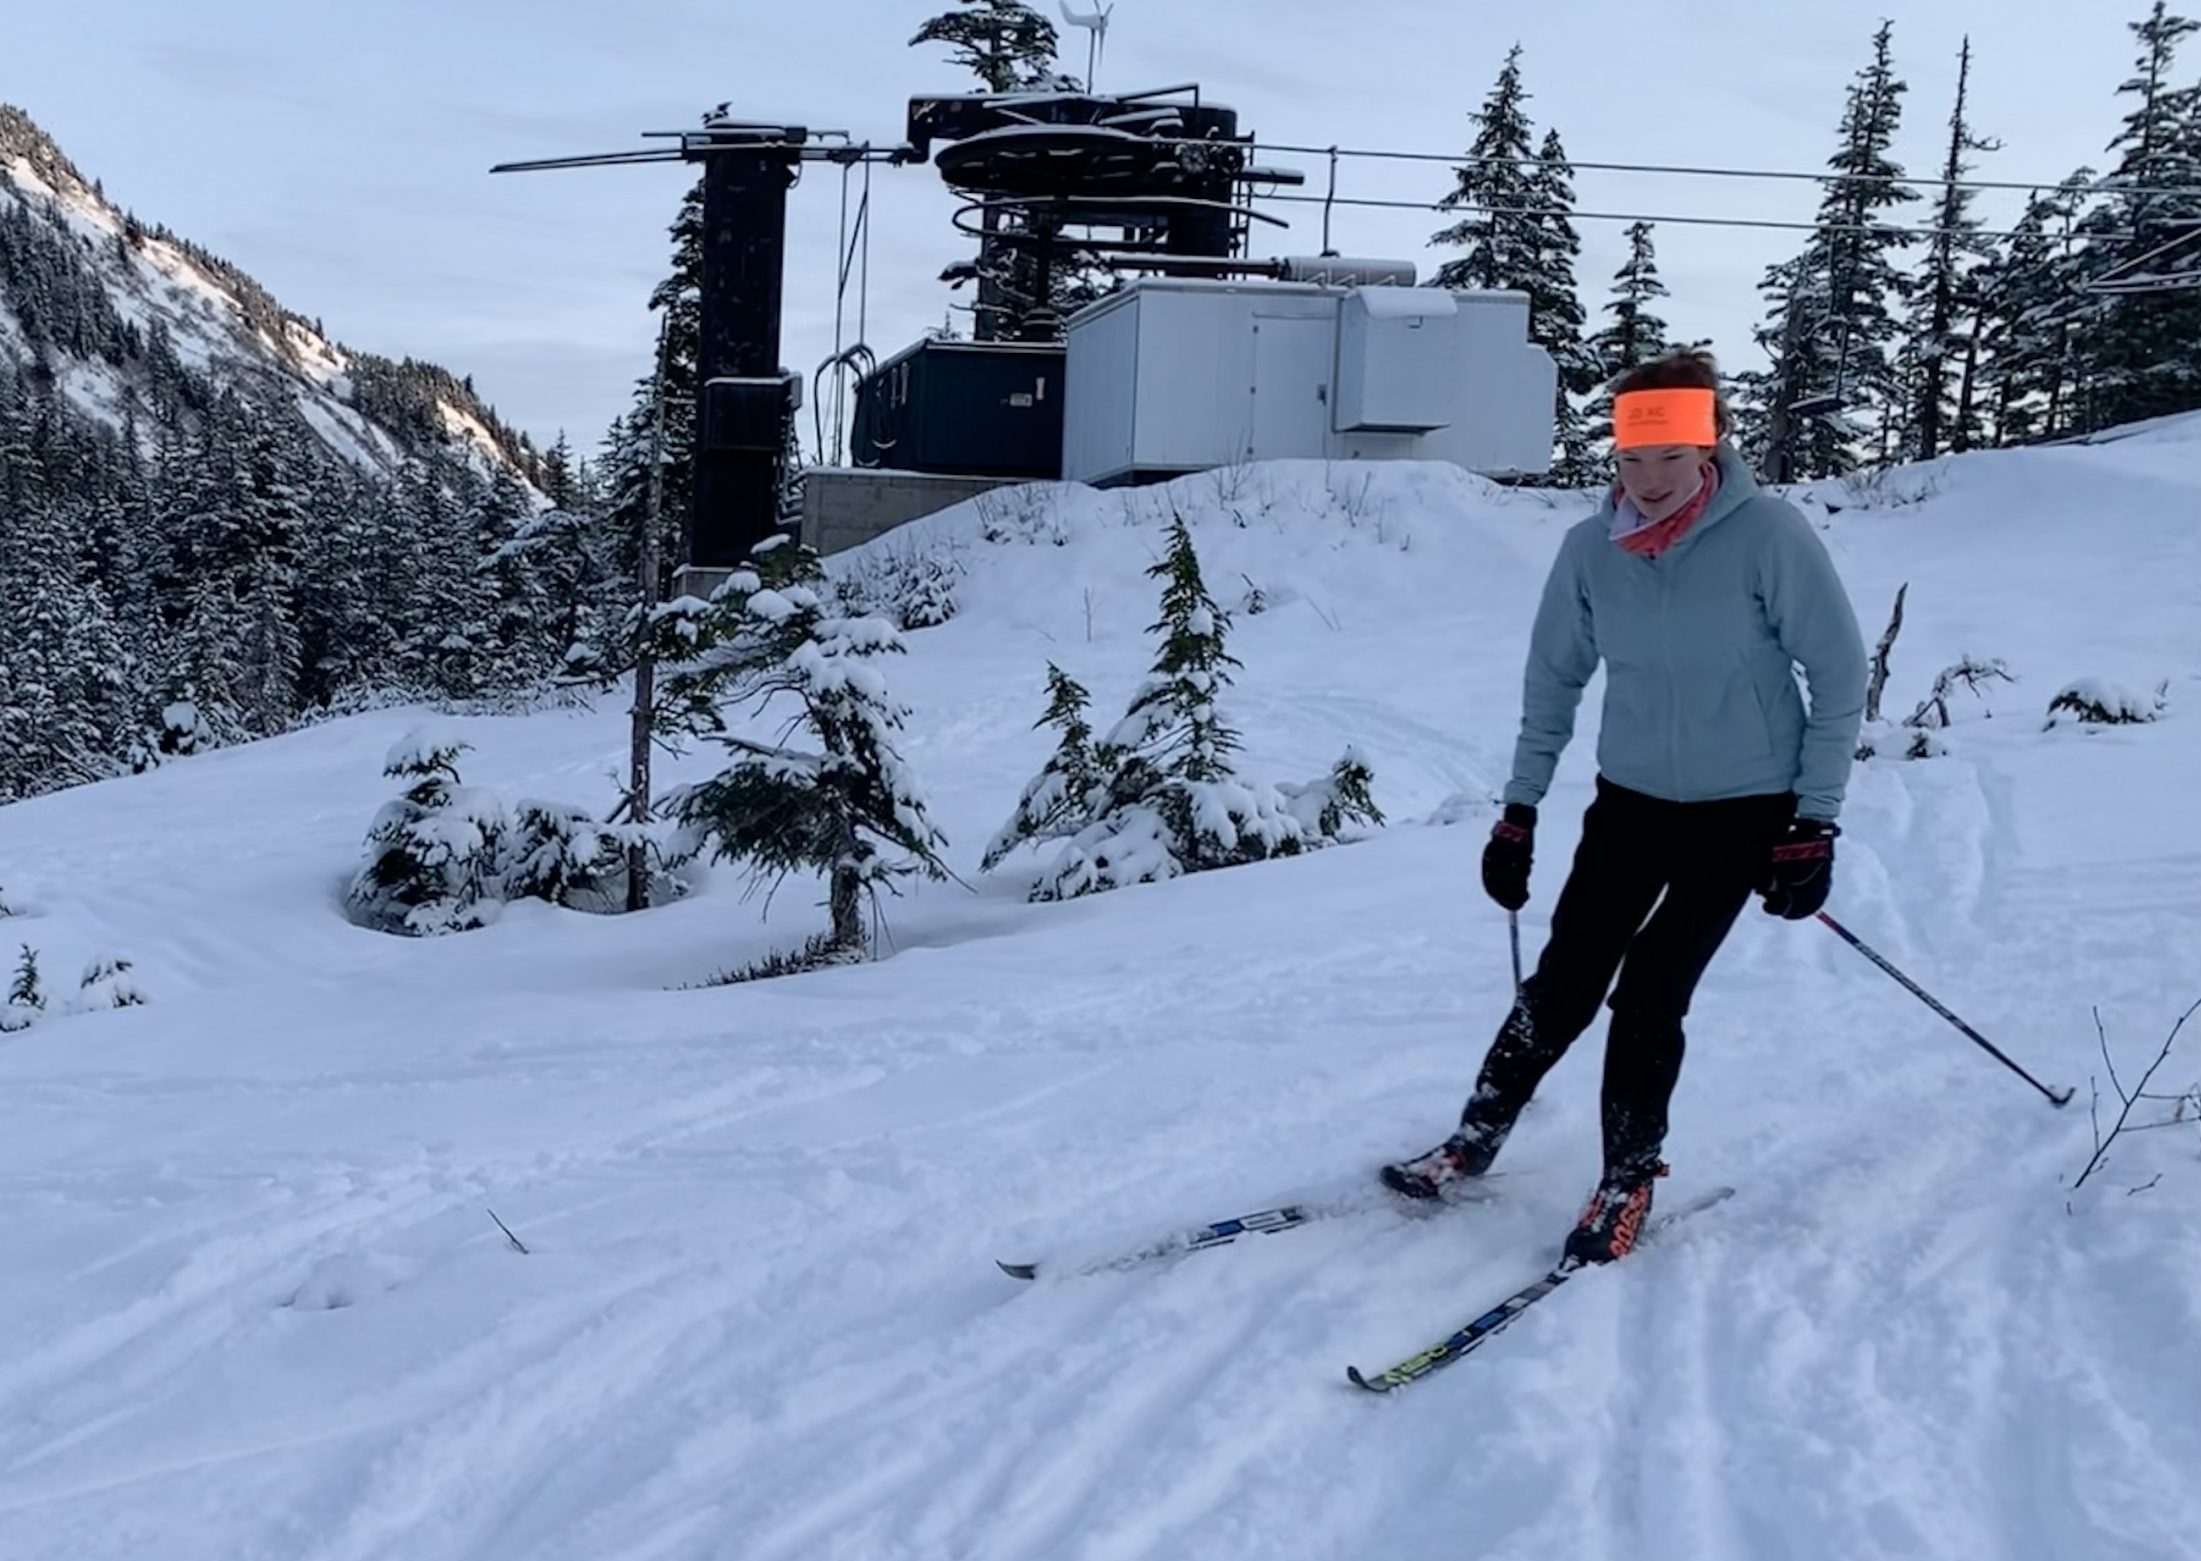 girl with red hair and orange bandana skis down a snowy slope